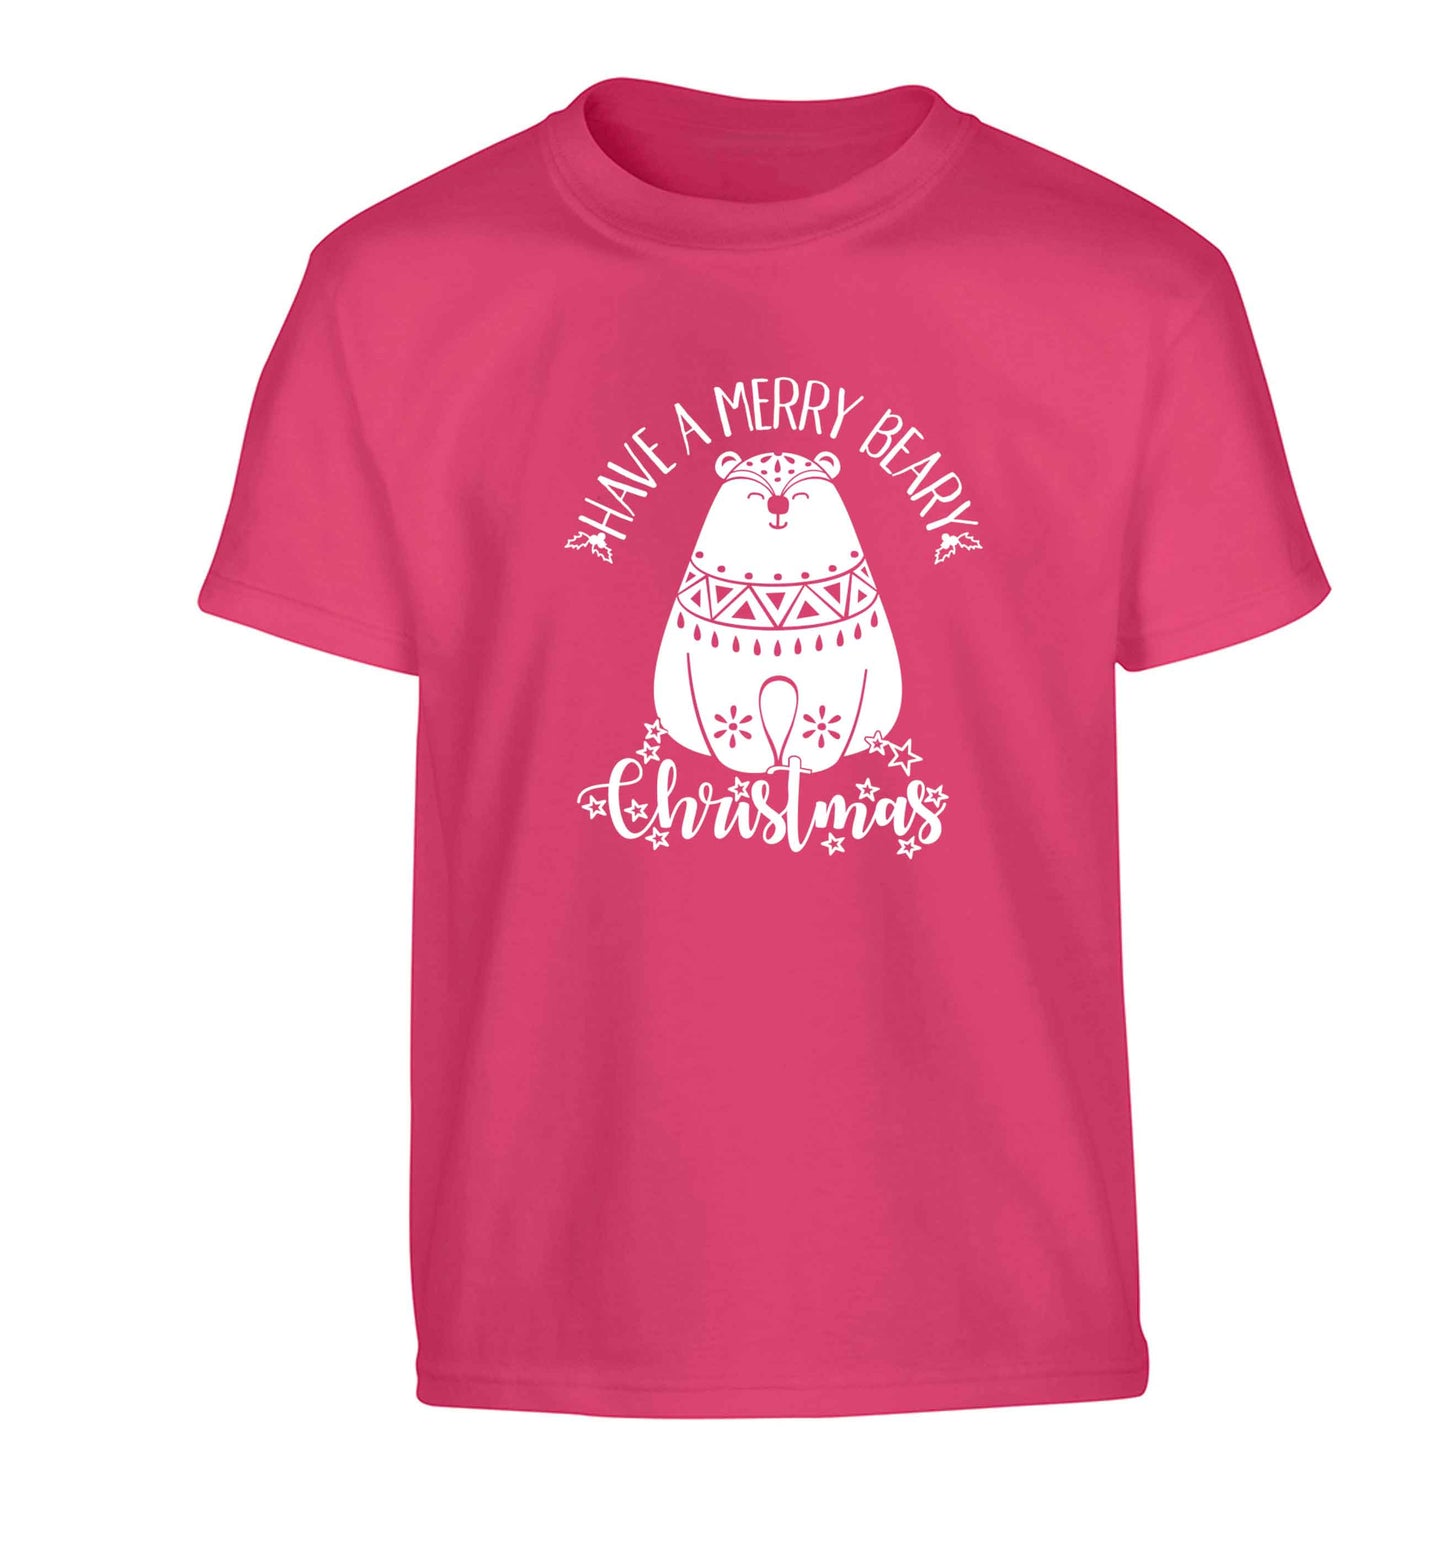 Have a merry beary Christmas Children's pink Tshirt 12-13 Years